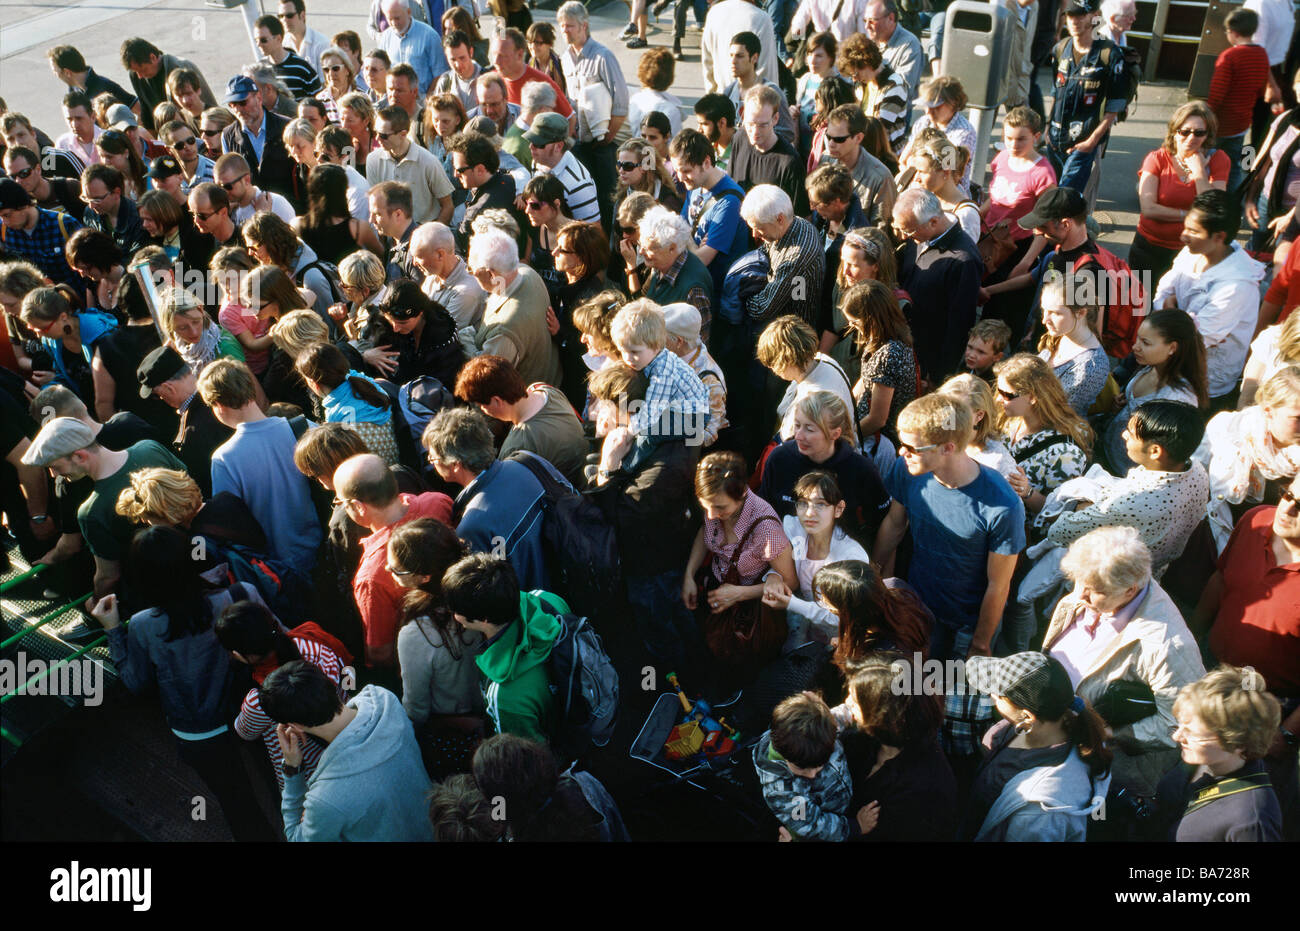 April 10, 2009 - Crowd pushing to board a ferry bound for Landungsbrücken at Neumühlen ferry pier in the German city of Hamburg. Stock Photo